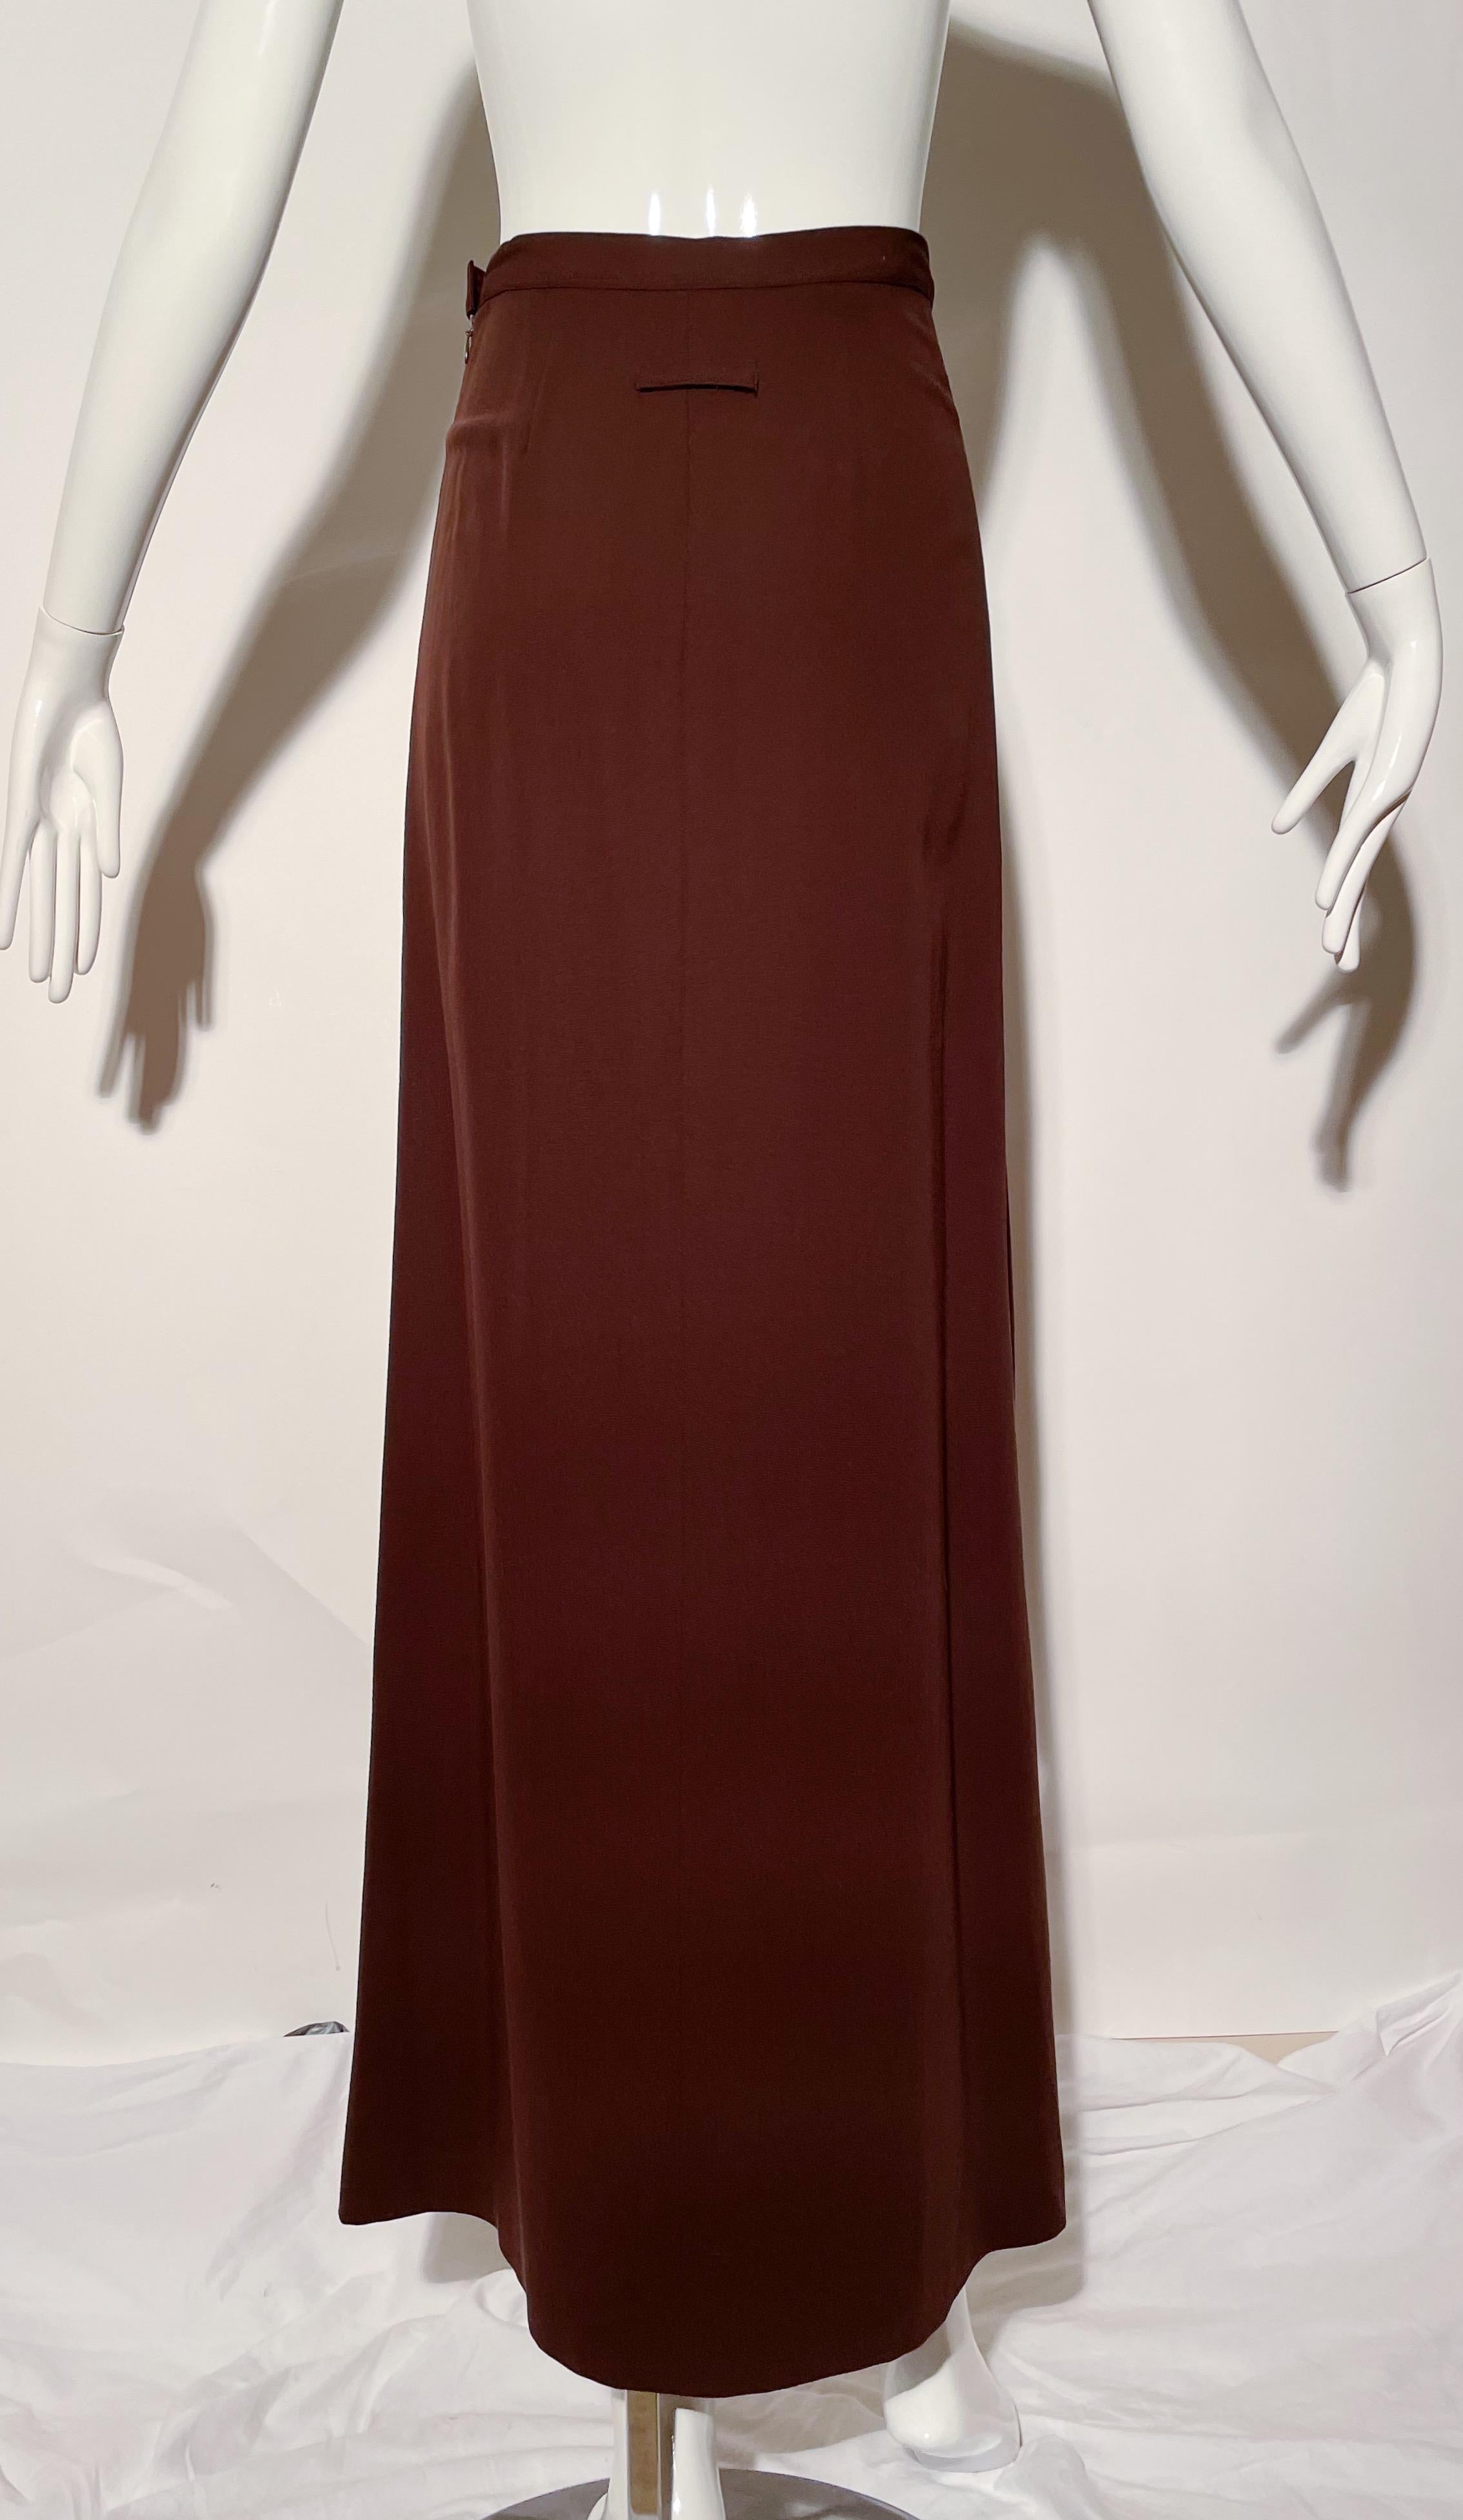 Chocolate brown maxi skirt. Side zipper. Wool. Made in Italy. 

*Condition: Excellent vintage condition. No visible flaws.

Measurements Taken Laying Flat (inches)—
Waist:  24 in.
Hip: 30 in.
Length: 41 in.
Marked size: 38 IT, 4 US, best fit for a